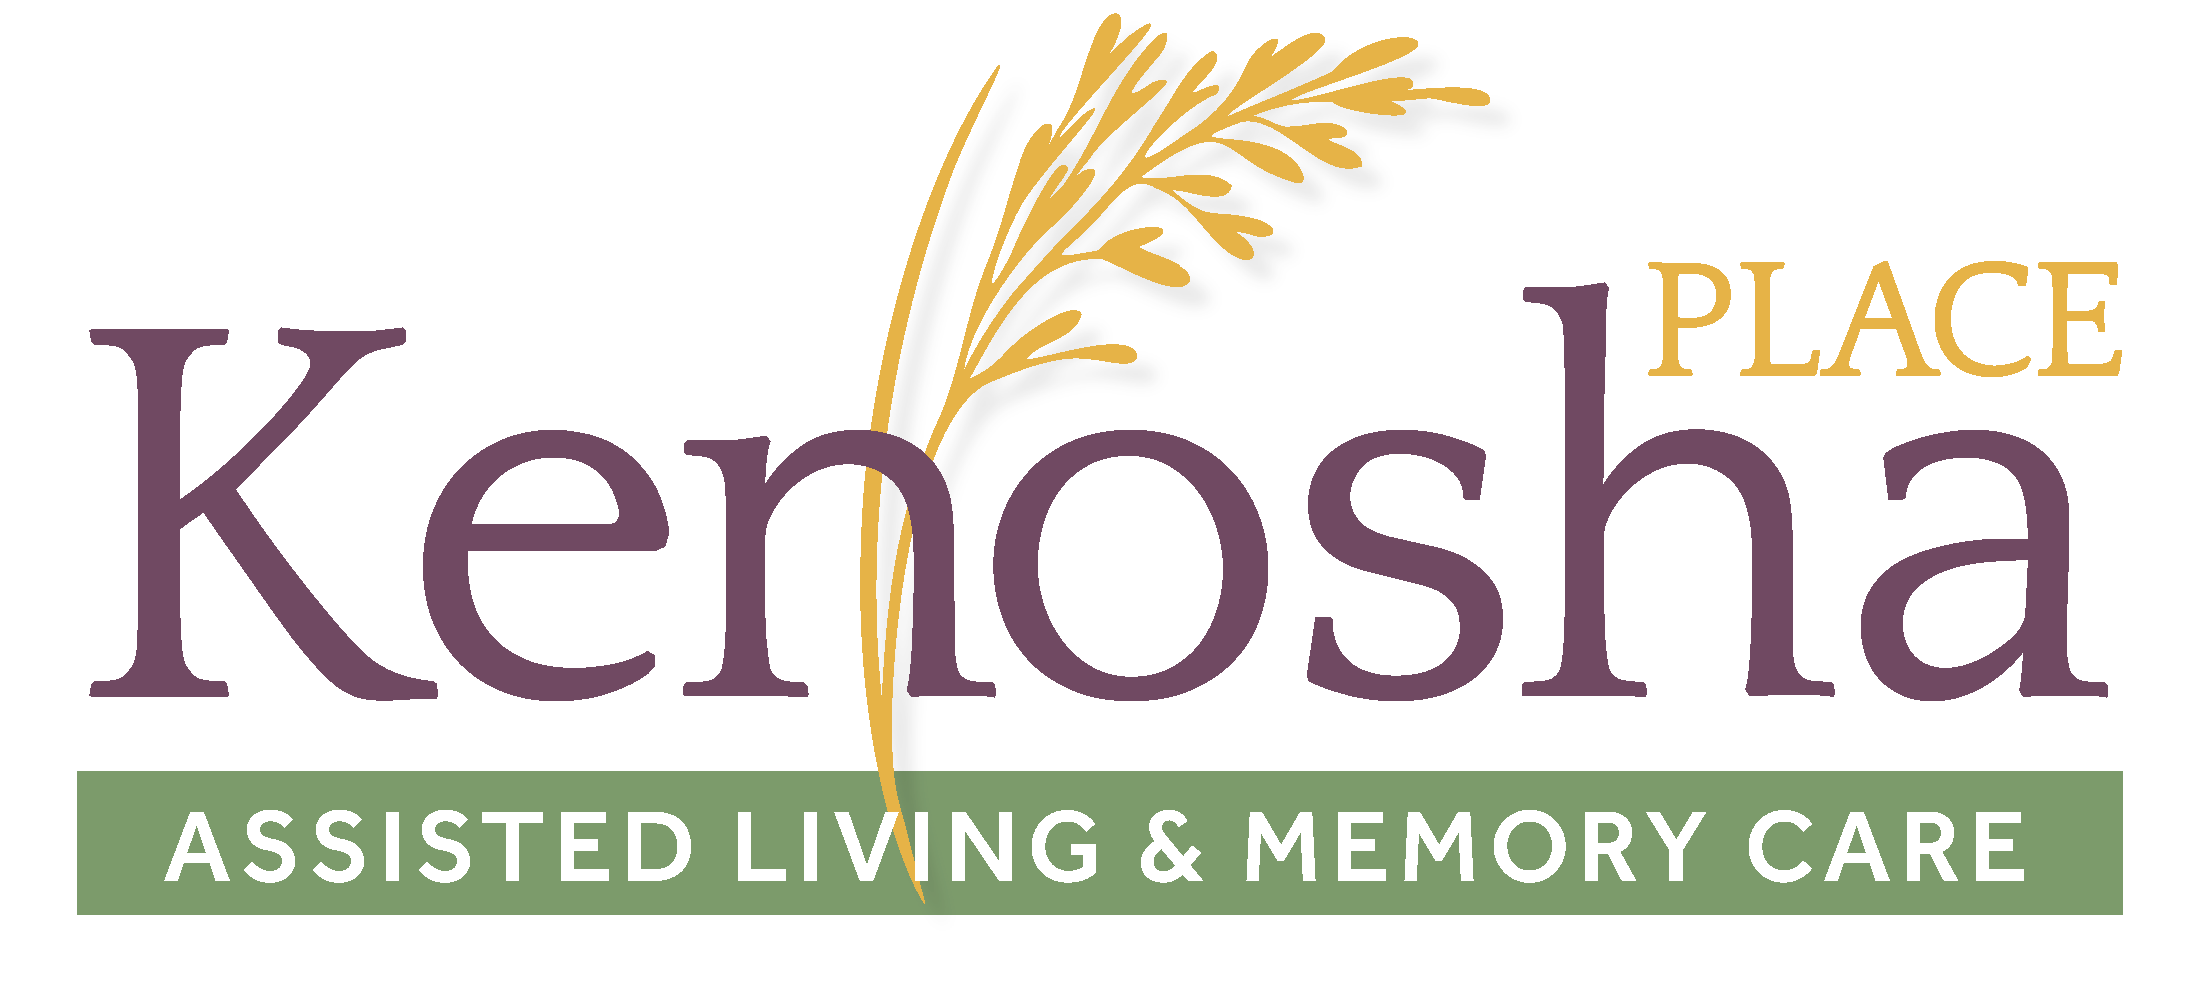 Kenosha Place Assisted Living and Memory Care